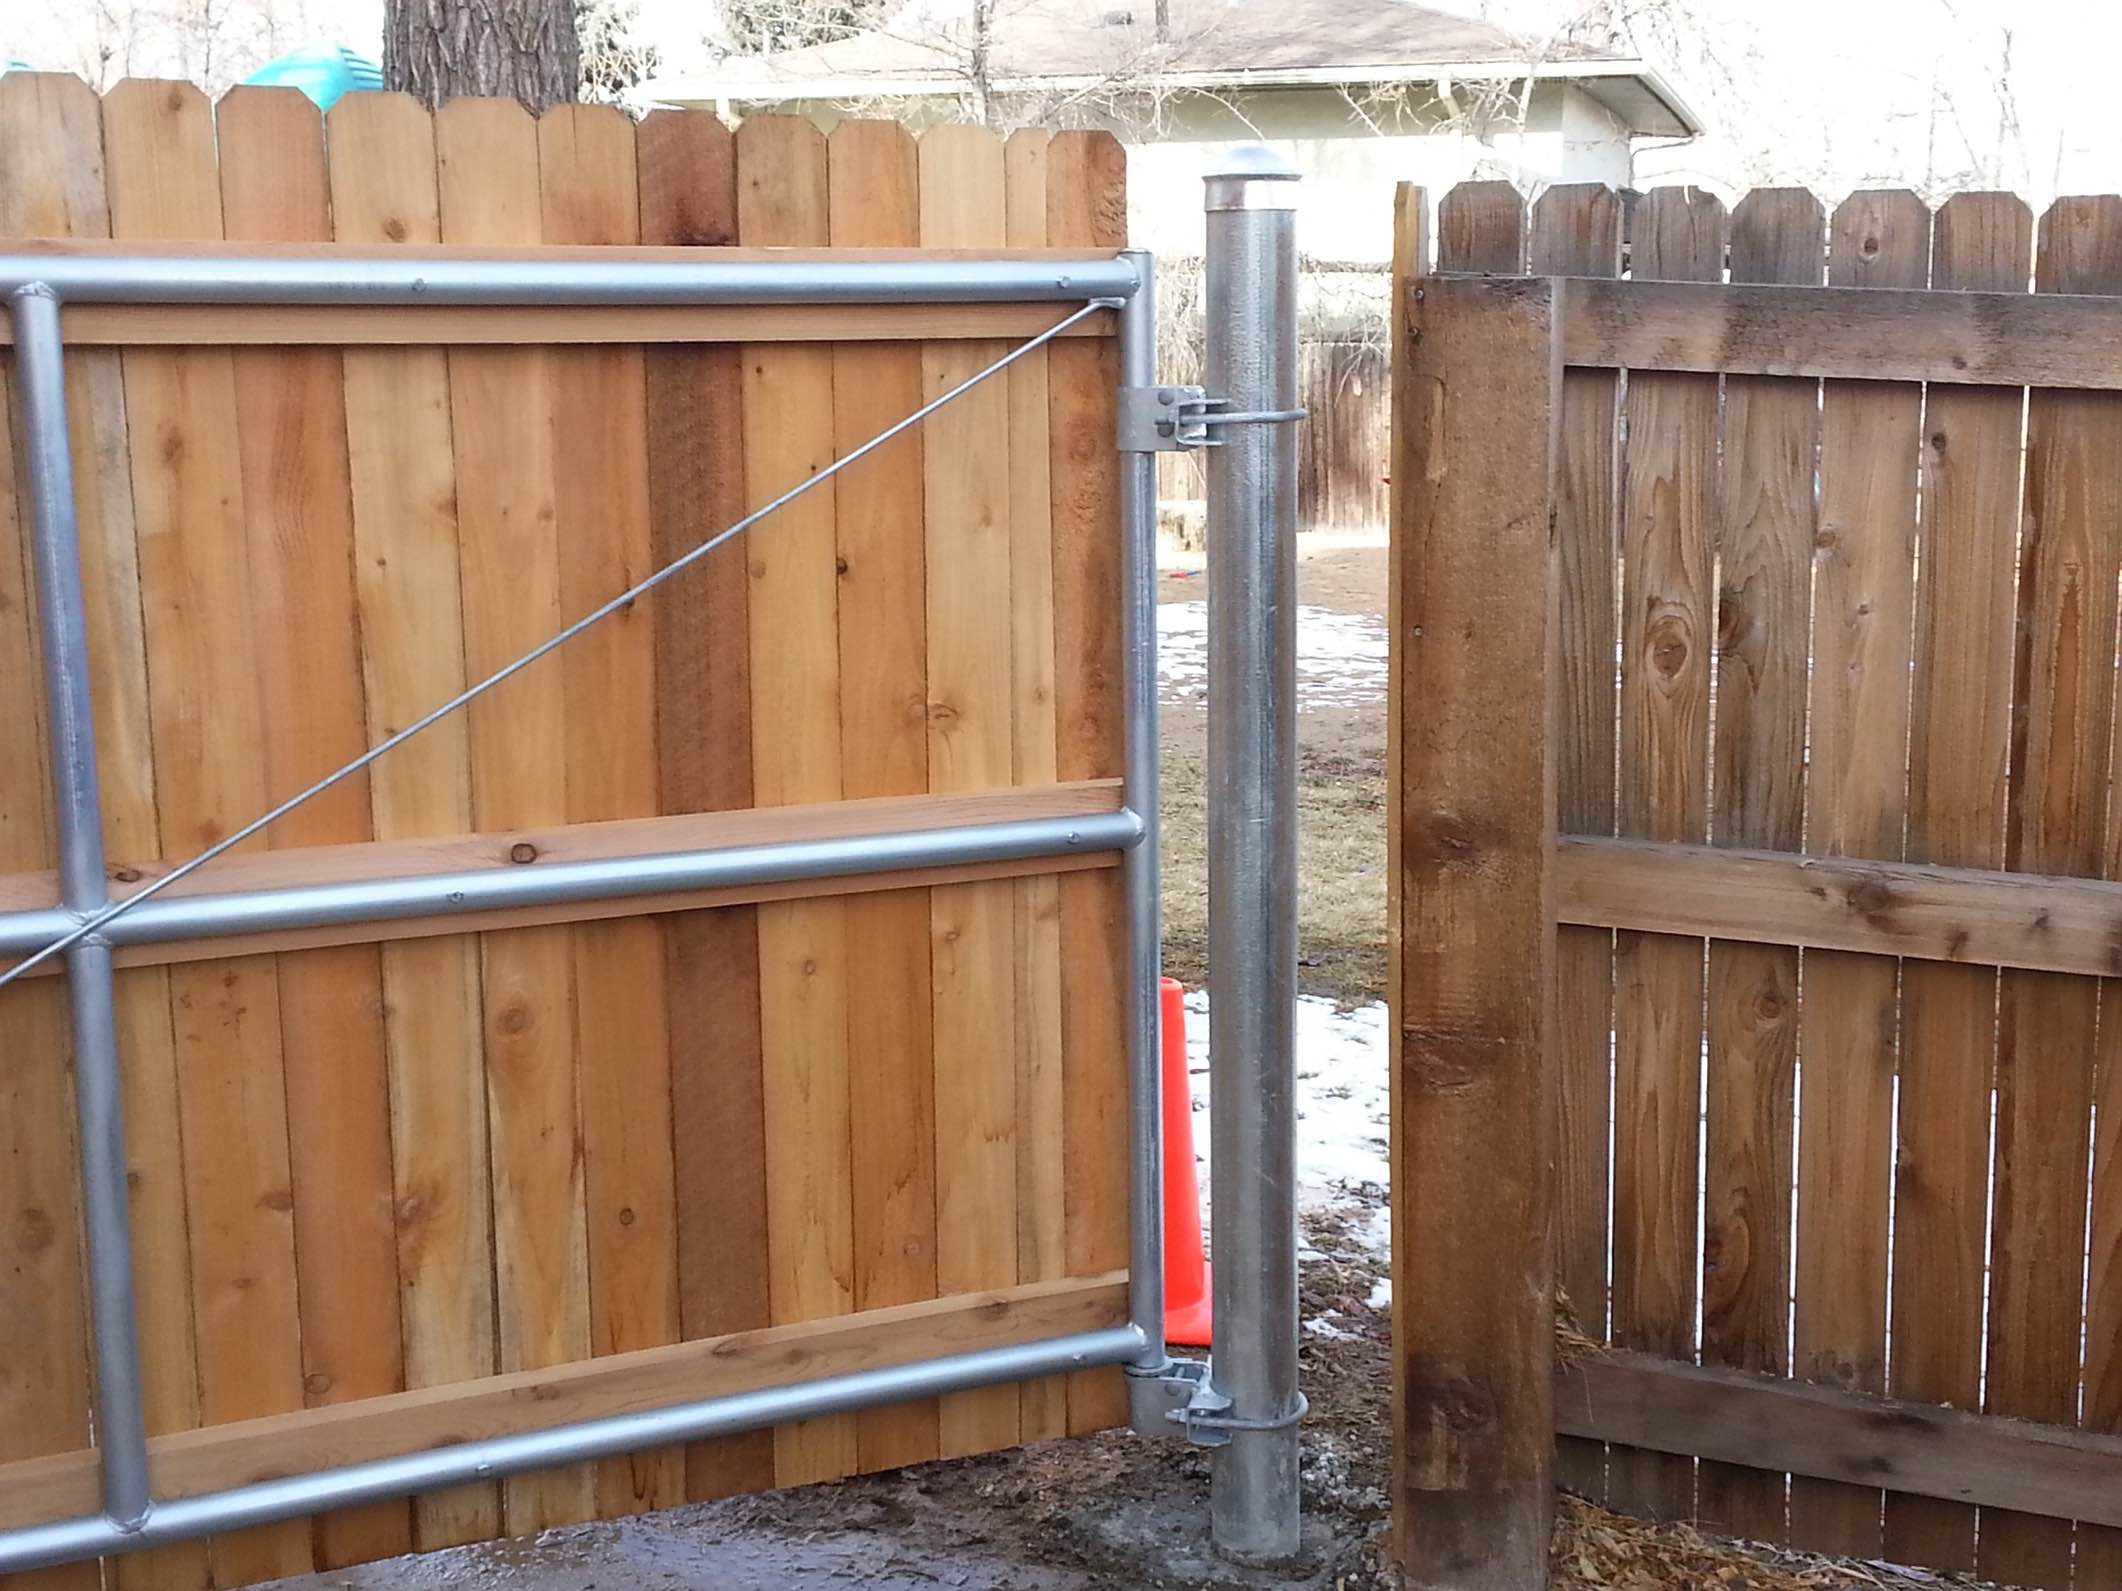 How To Build A Wood Fence Gate With Metal Posts Do This Upgraded Home ...